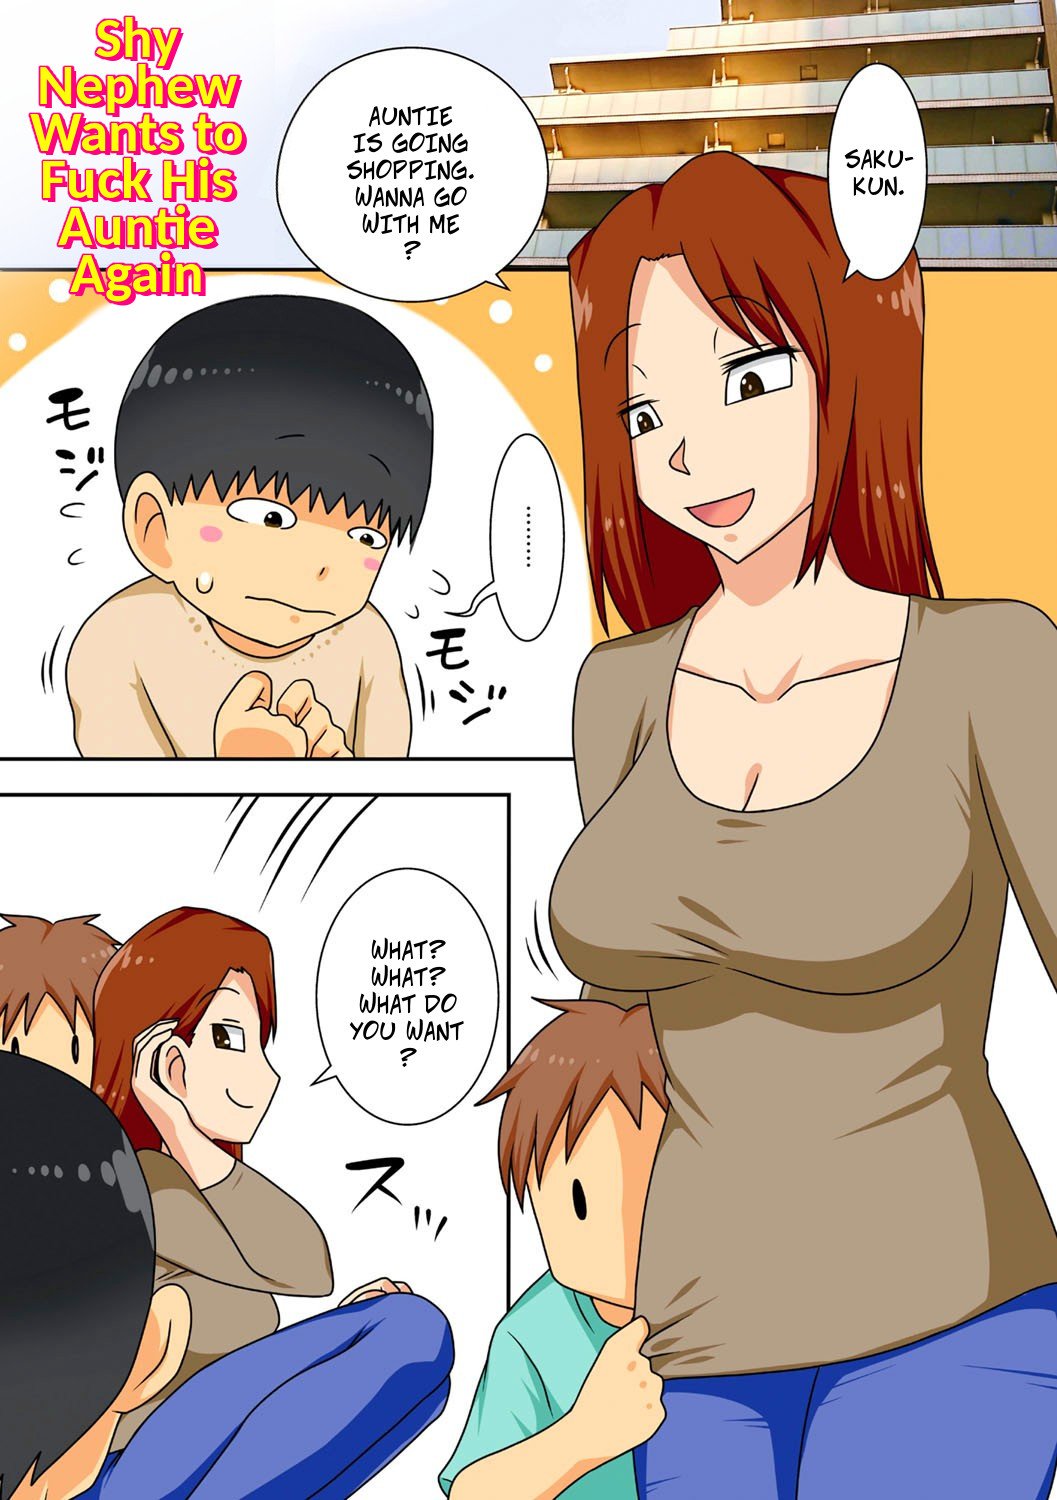 Shy Nephew Wants To Fuck Auntie Again comic porn pic